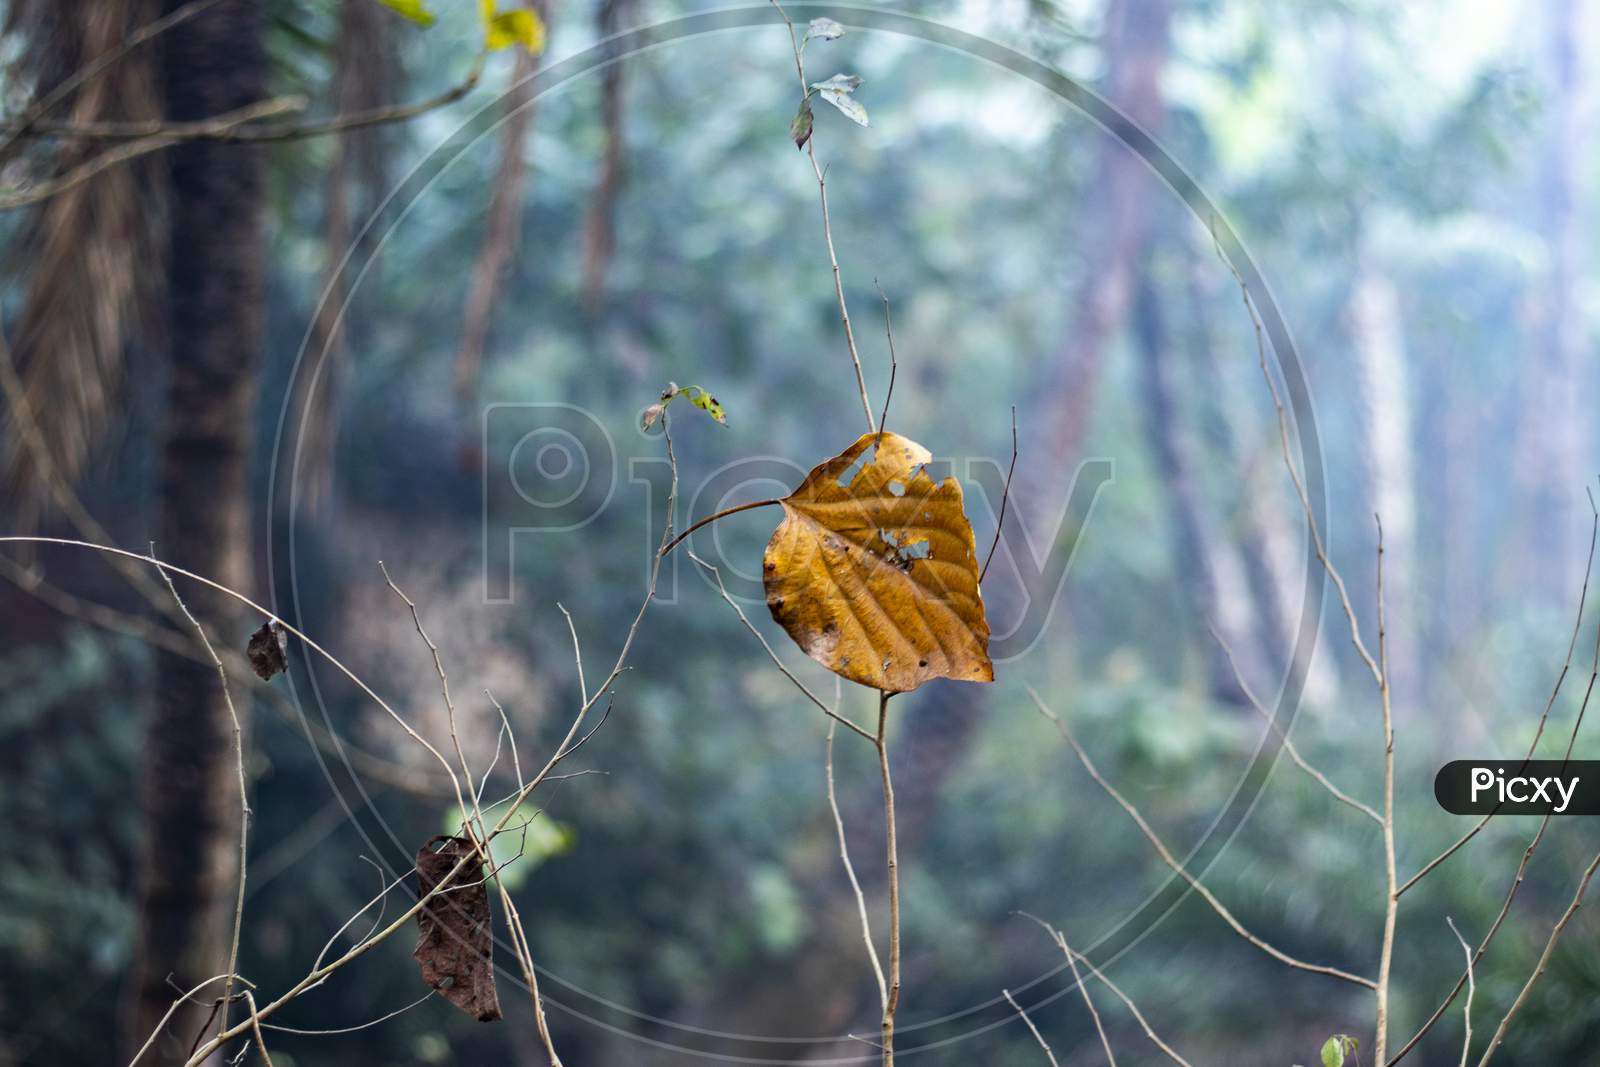 A Dead, Dry Brown Leaf Still Stuck To The Stem Against A Forest Blur Background